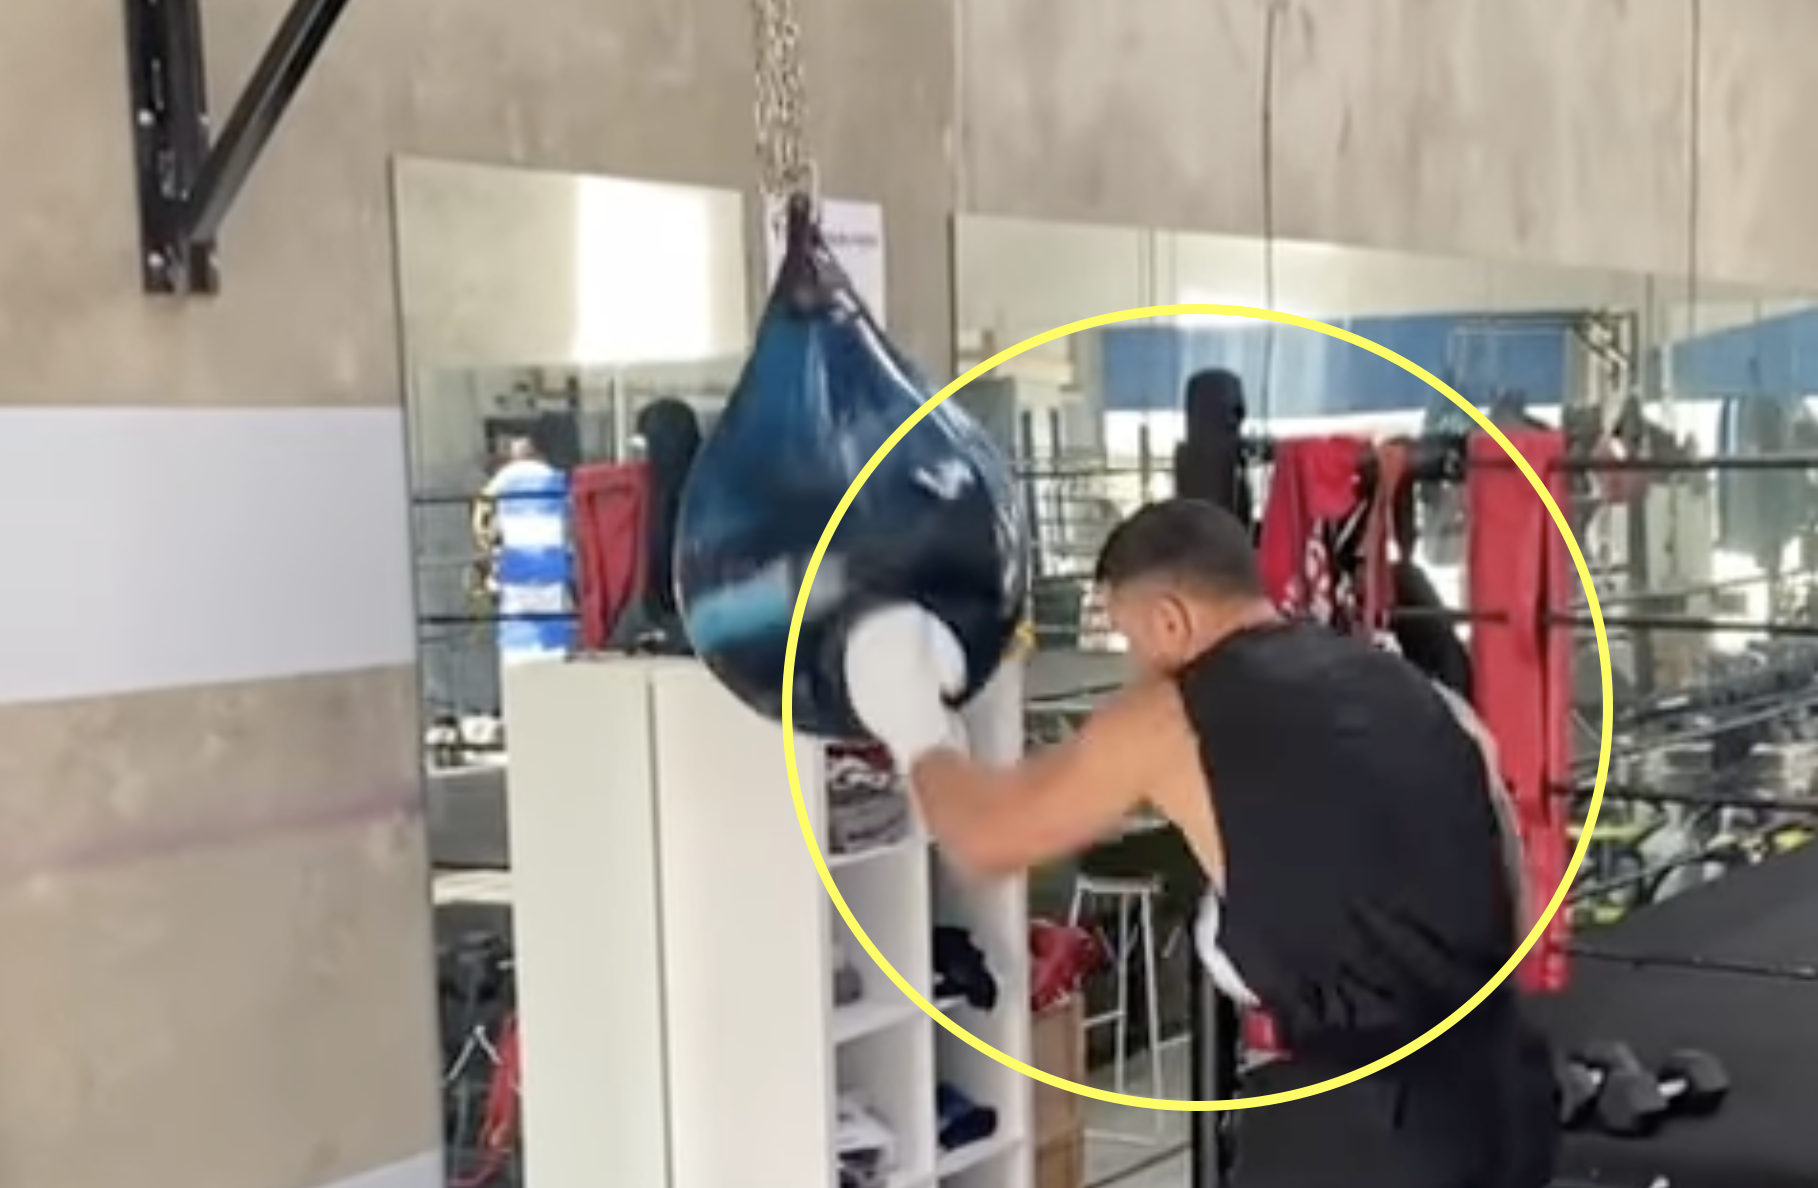 Sonny Bill Williams drops major hint over next move with mega fight looming